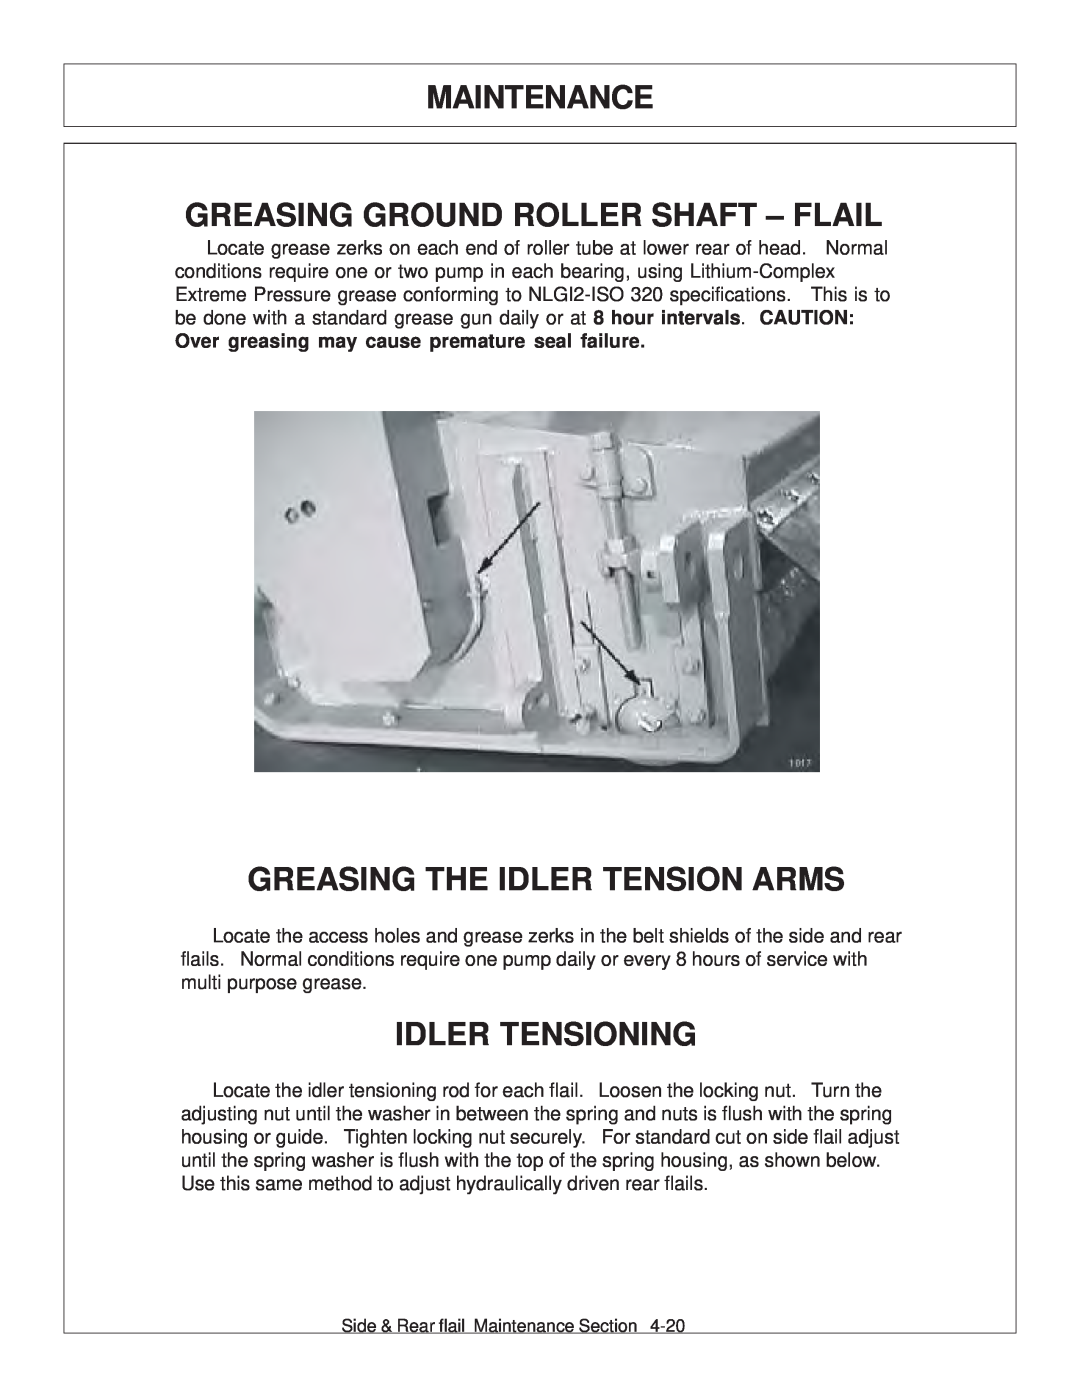 Tiger JD 5083E manual Greasing Ground Roller Shaft - Flail, Greasing The Idler Tension Arms, Idler Tensioning, Maintenance 